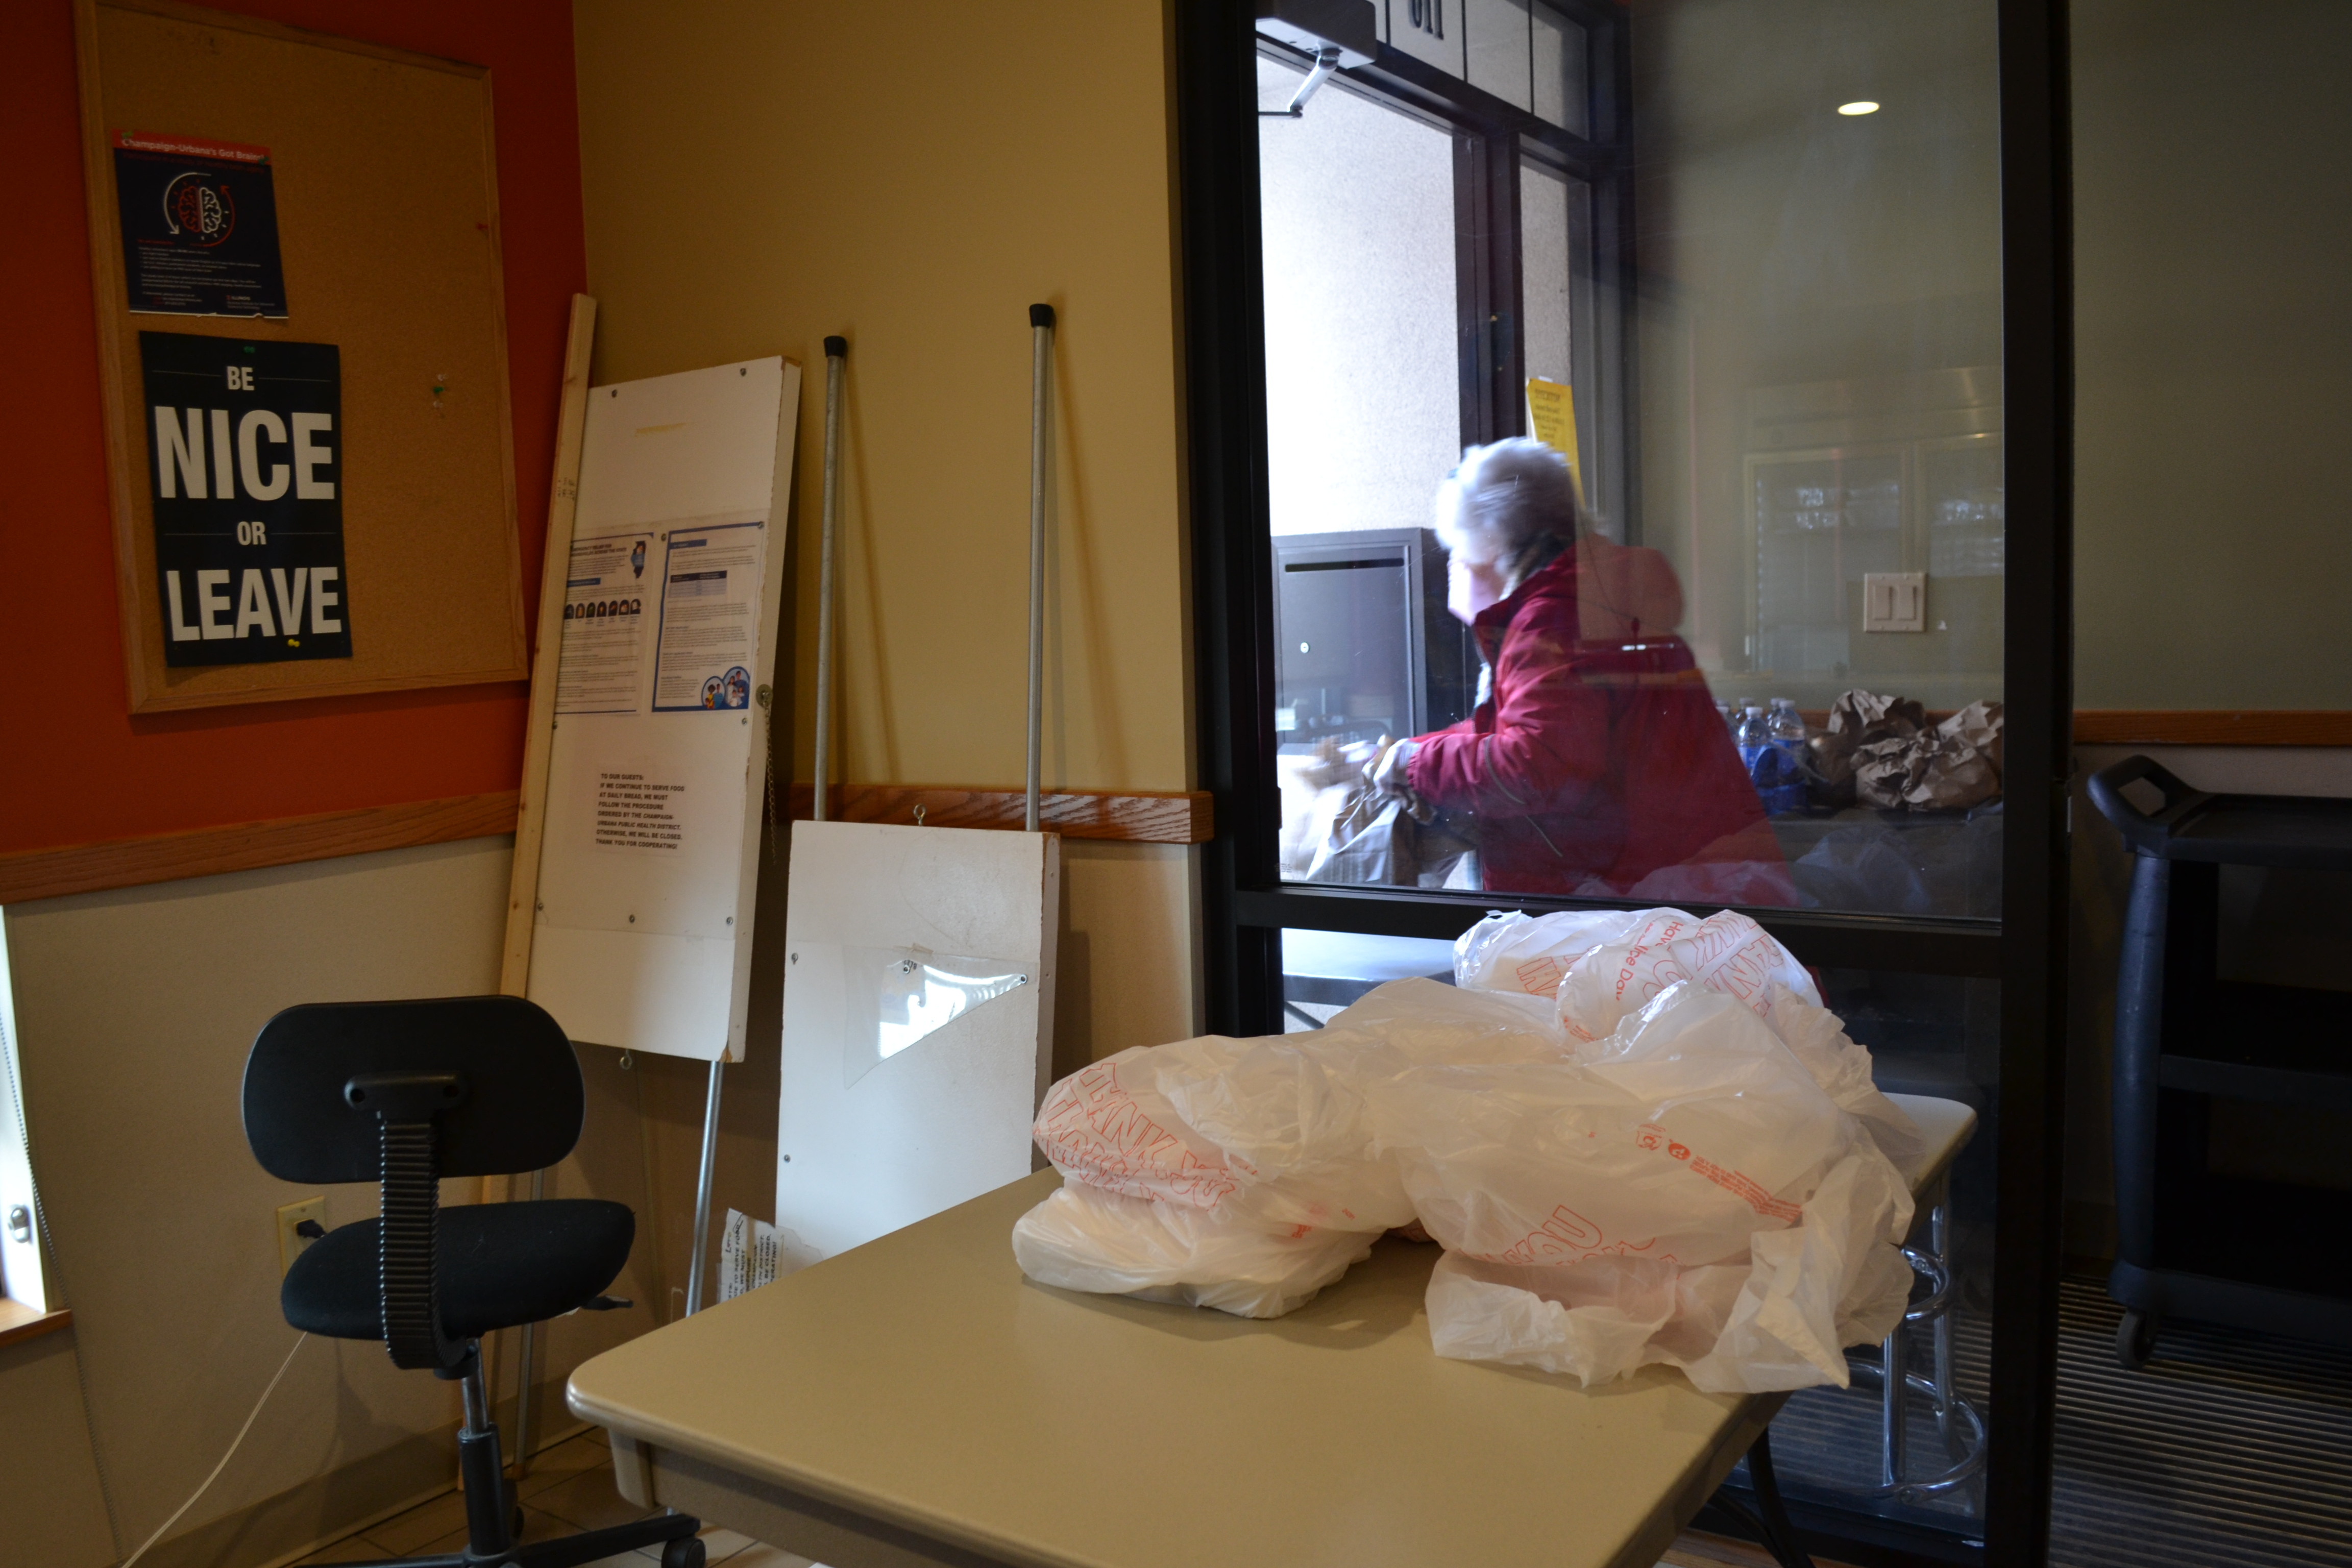 At the Daily Bread Soup Kitchen, there is a folding table with lunches ready to be distributed. In a small glass room, the door is open to First Street. Ruth Ann and Charlie Evans are masked and giving out meals. Photo by Alyssa Buckley.